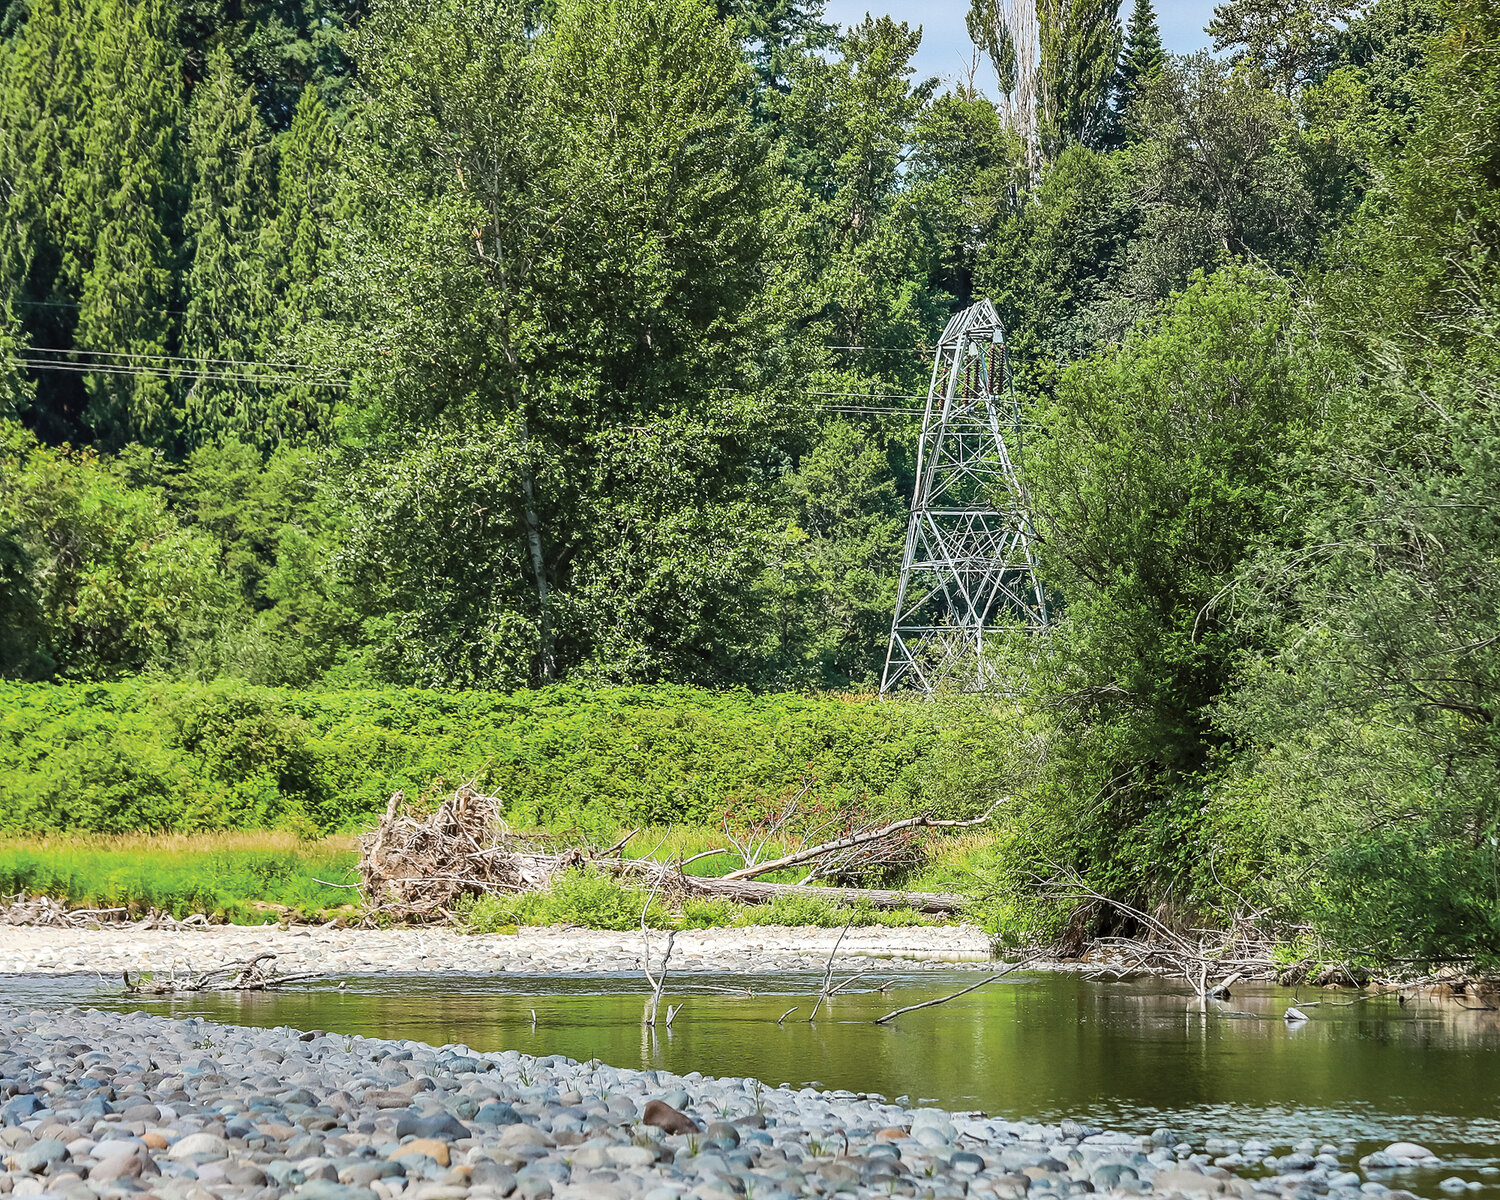 A Bonneville Power Administration utility tower stands among lowlands at the “Ridgefield Pits” along the East Fork Lewis River on July 11.